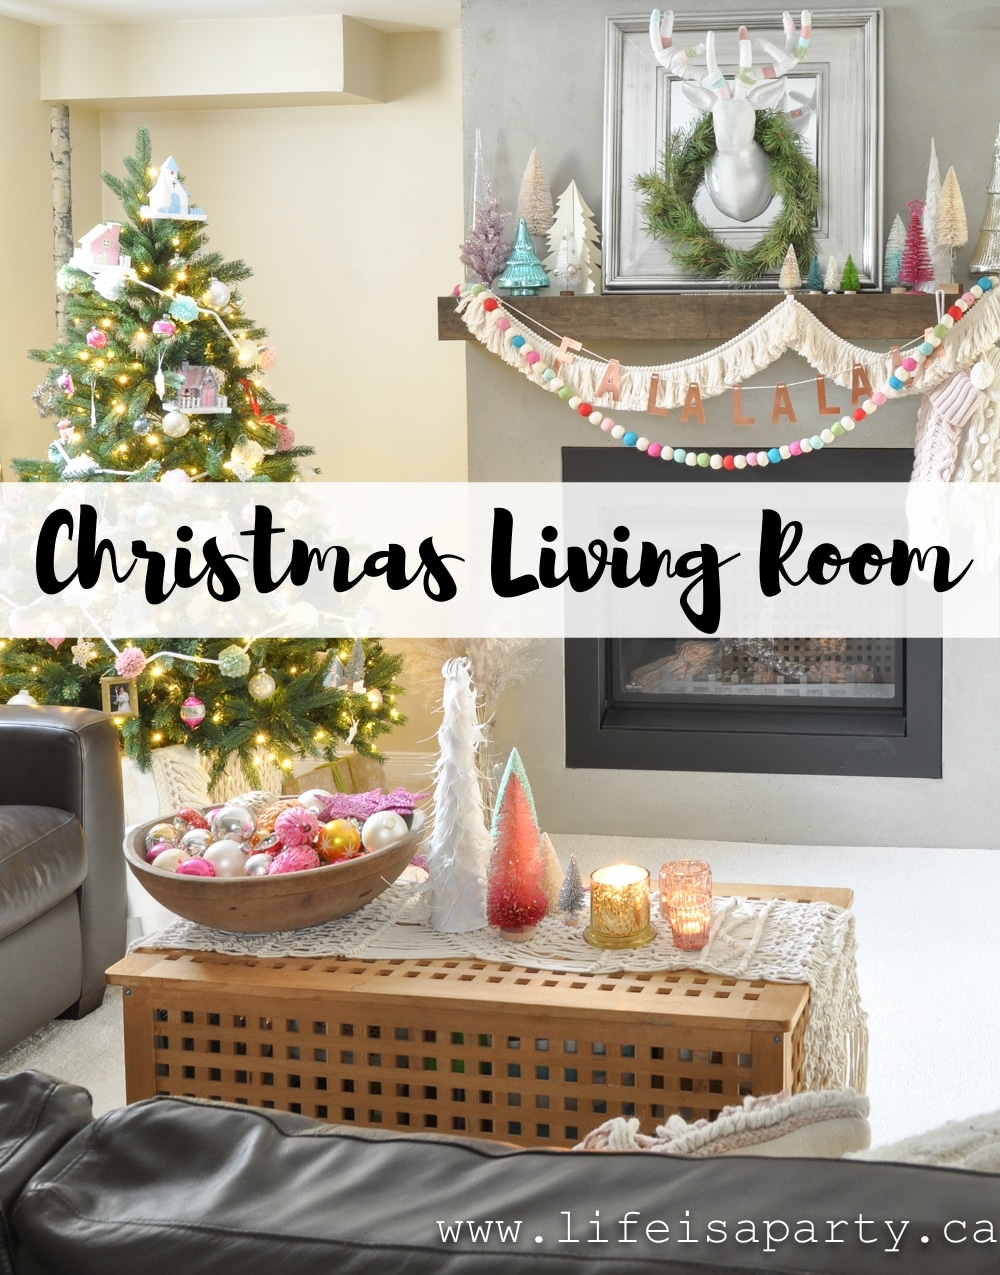 Pastel Christmas Living Room: Inspired by Anthropologie, with bottle brush Christmas trees, mercury glass, vintage ornaments, macrame, & pastel colours.